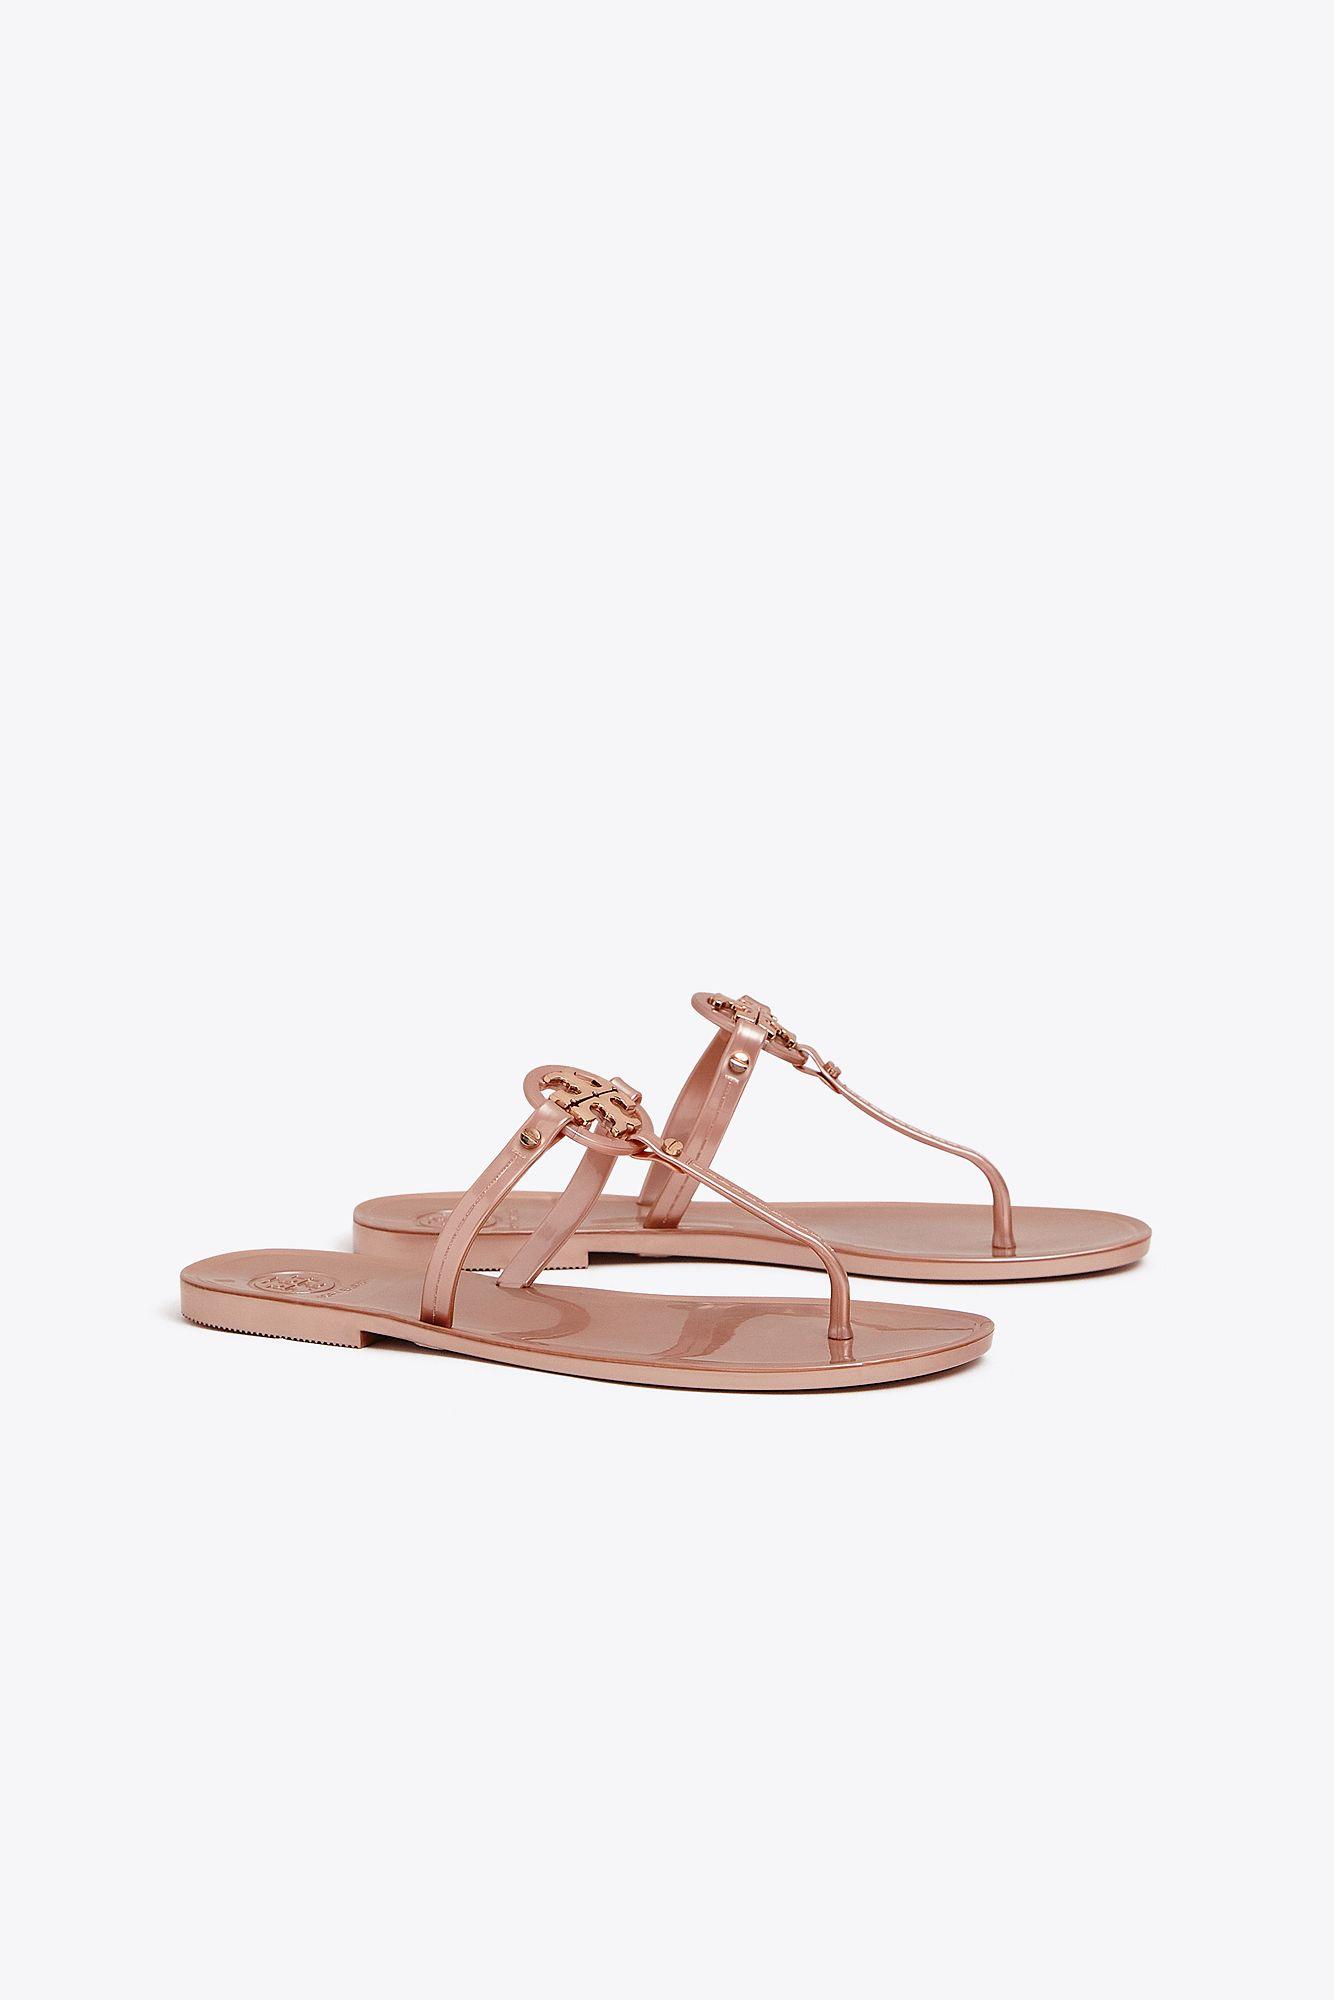 Tory Burch Mini Miller Jelly Thong Sandals in Pink | Lyst